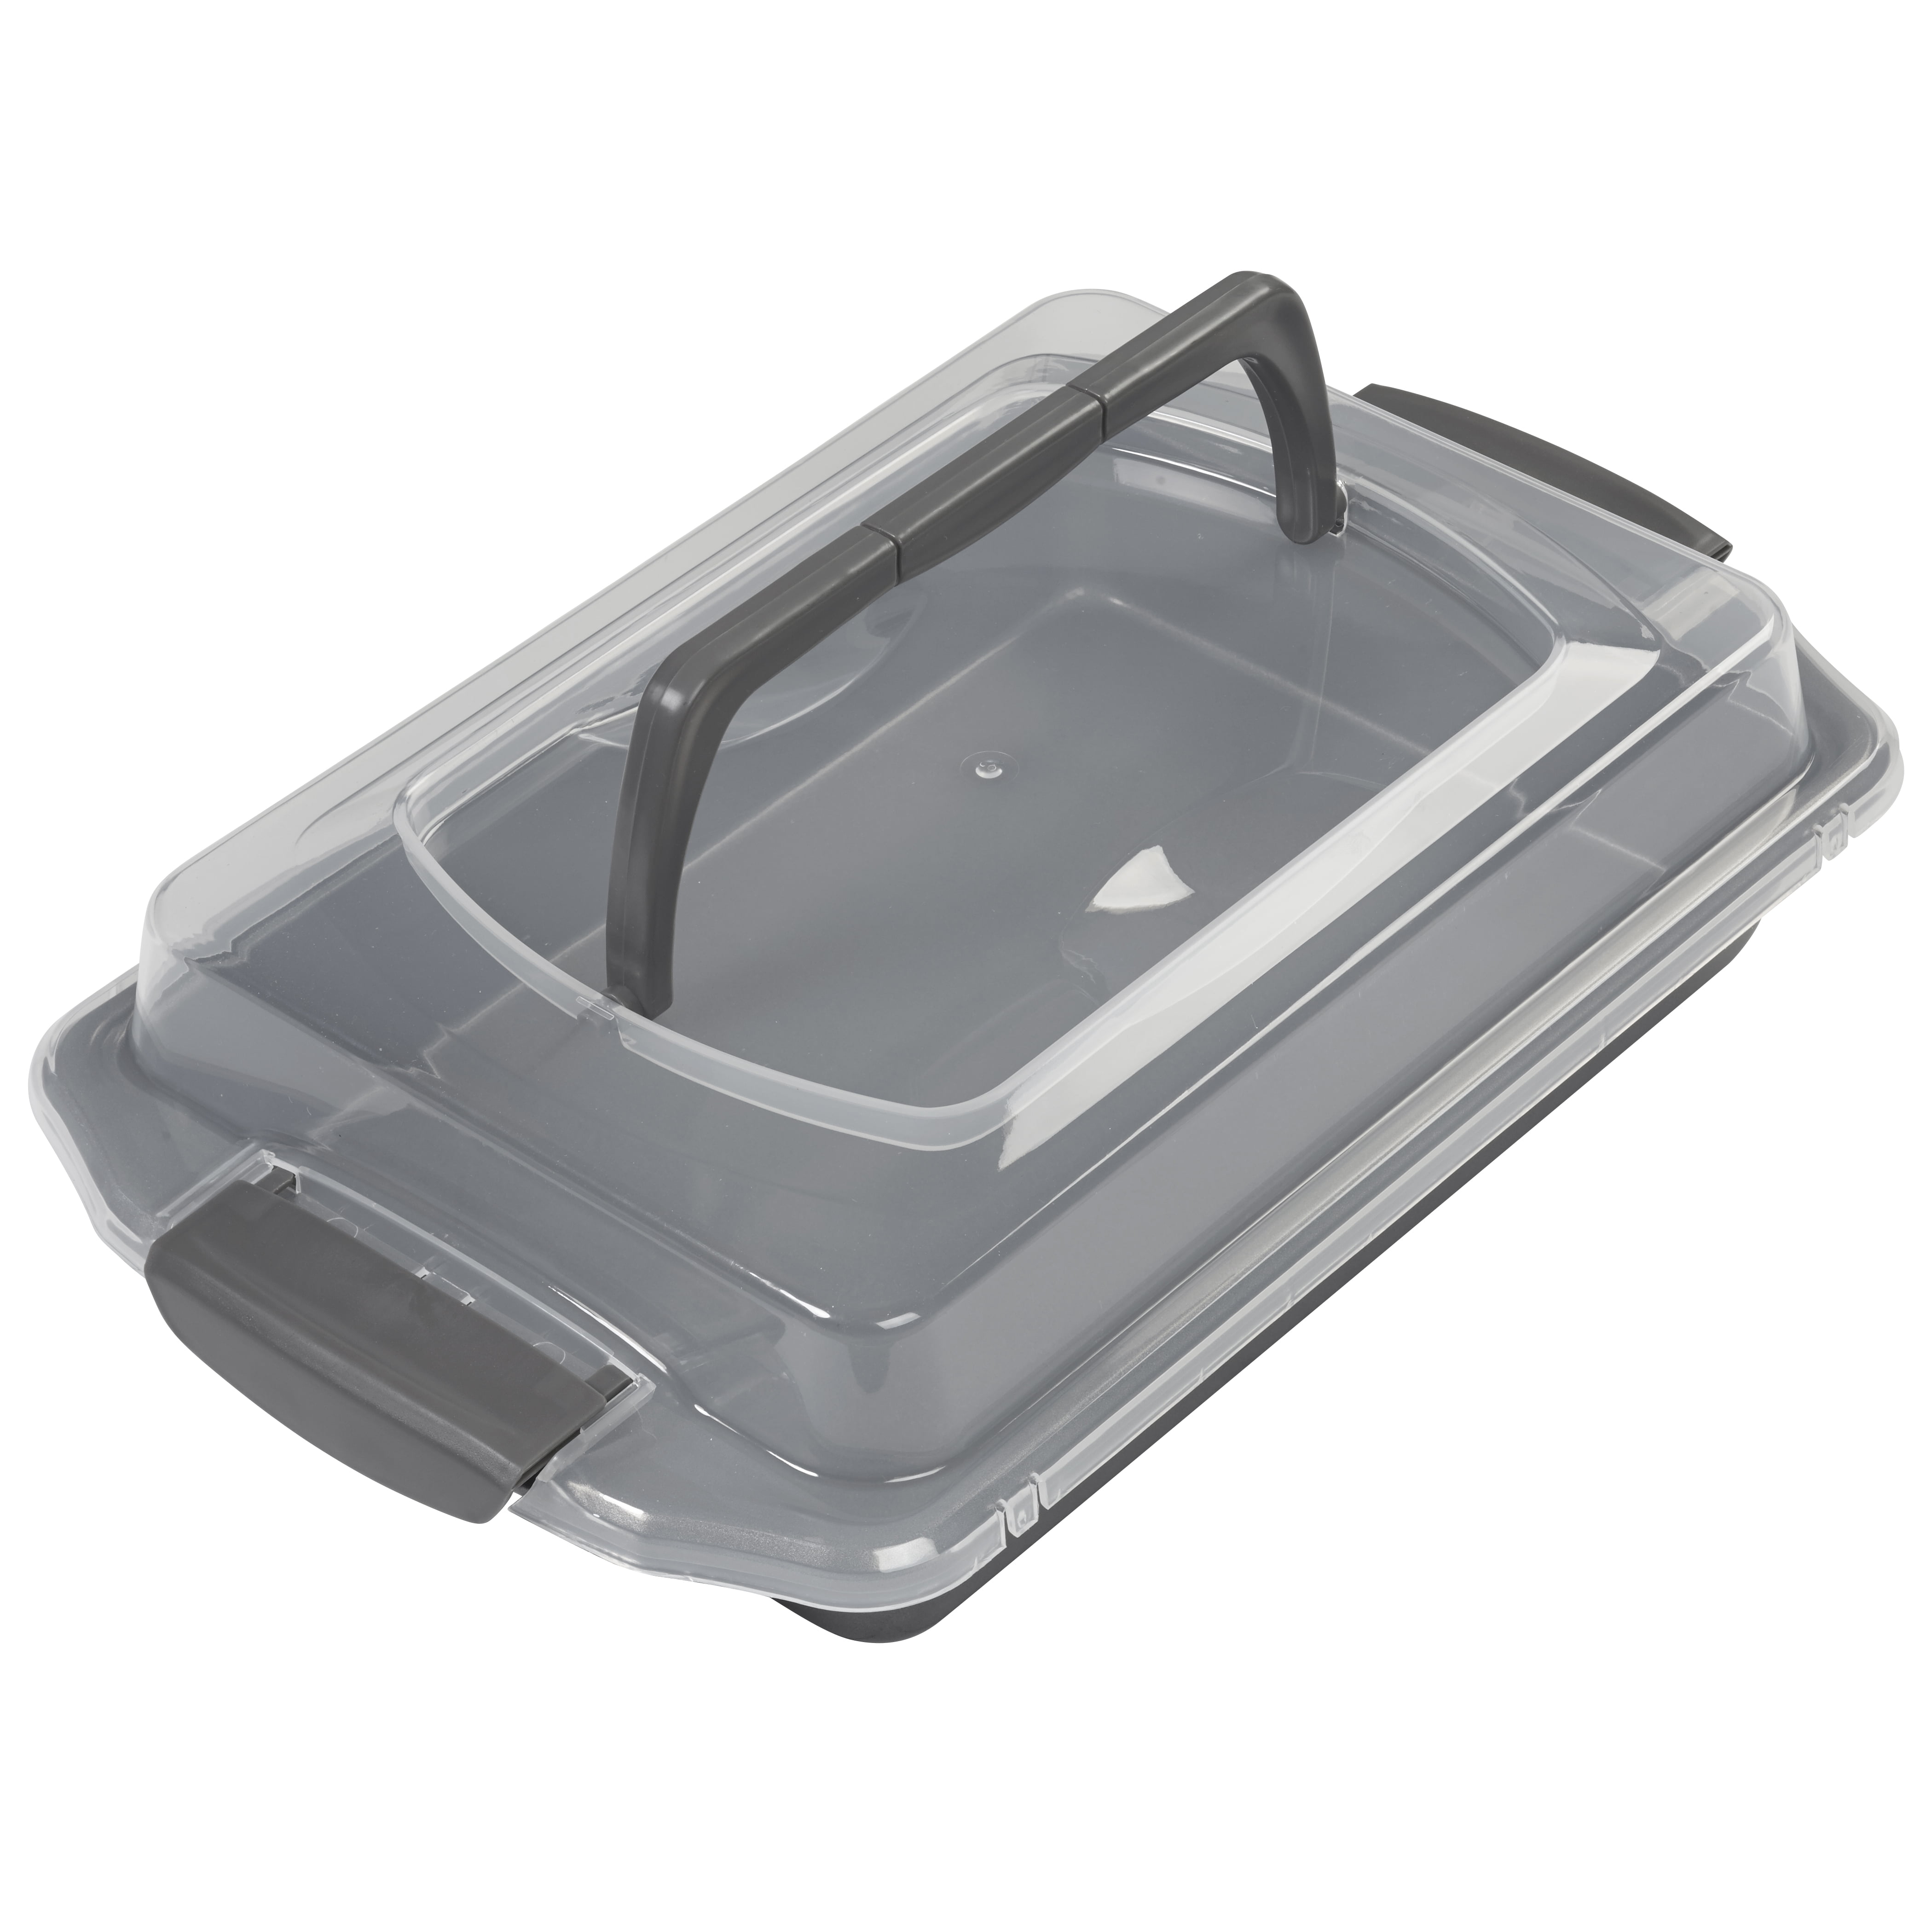 Wilton Bake It Better Non-Stick Oblong Cake Pan with Lid and Handle, 9 x 13 in.